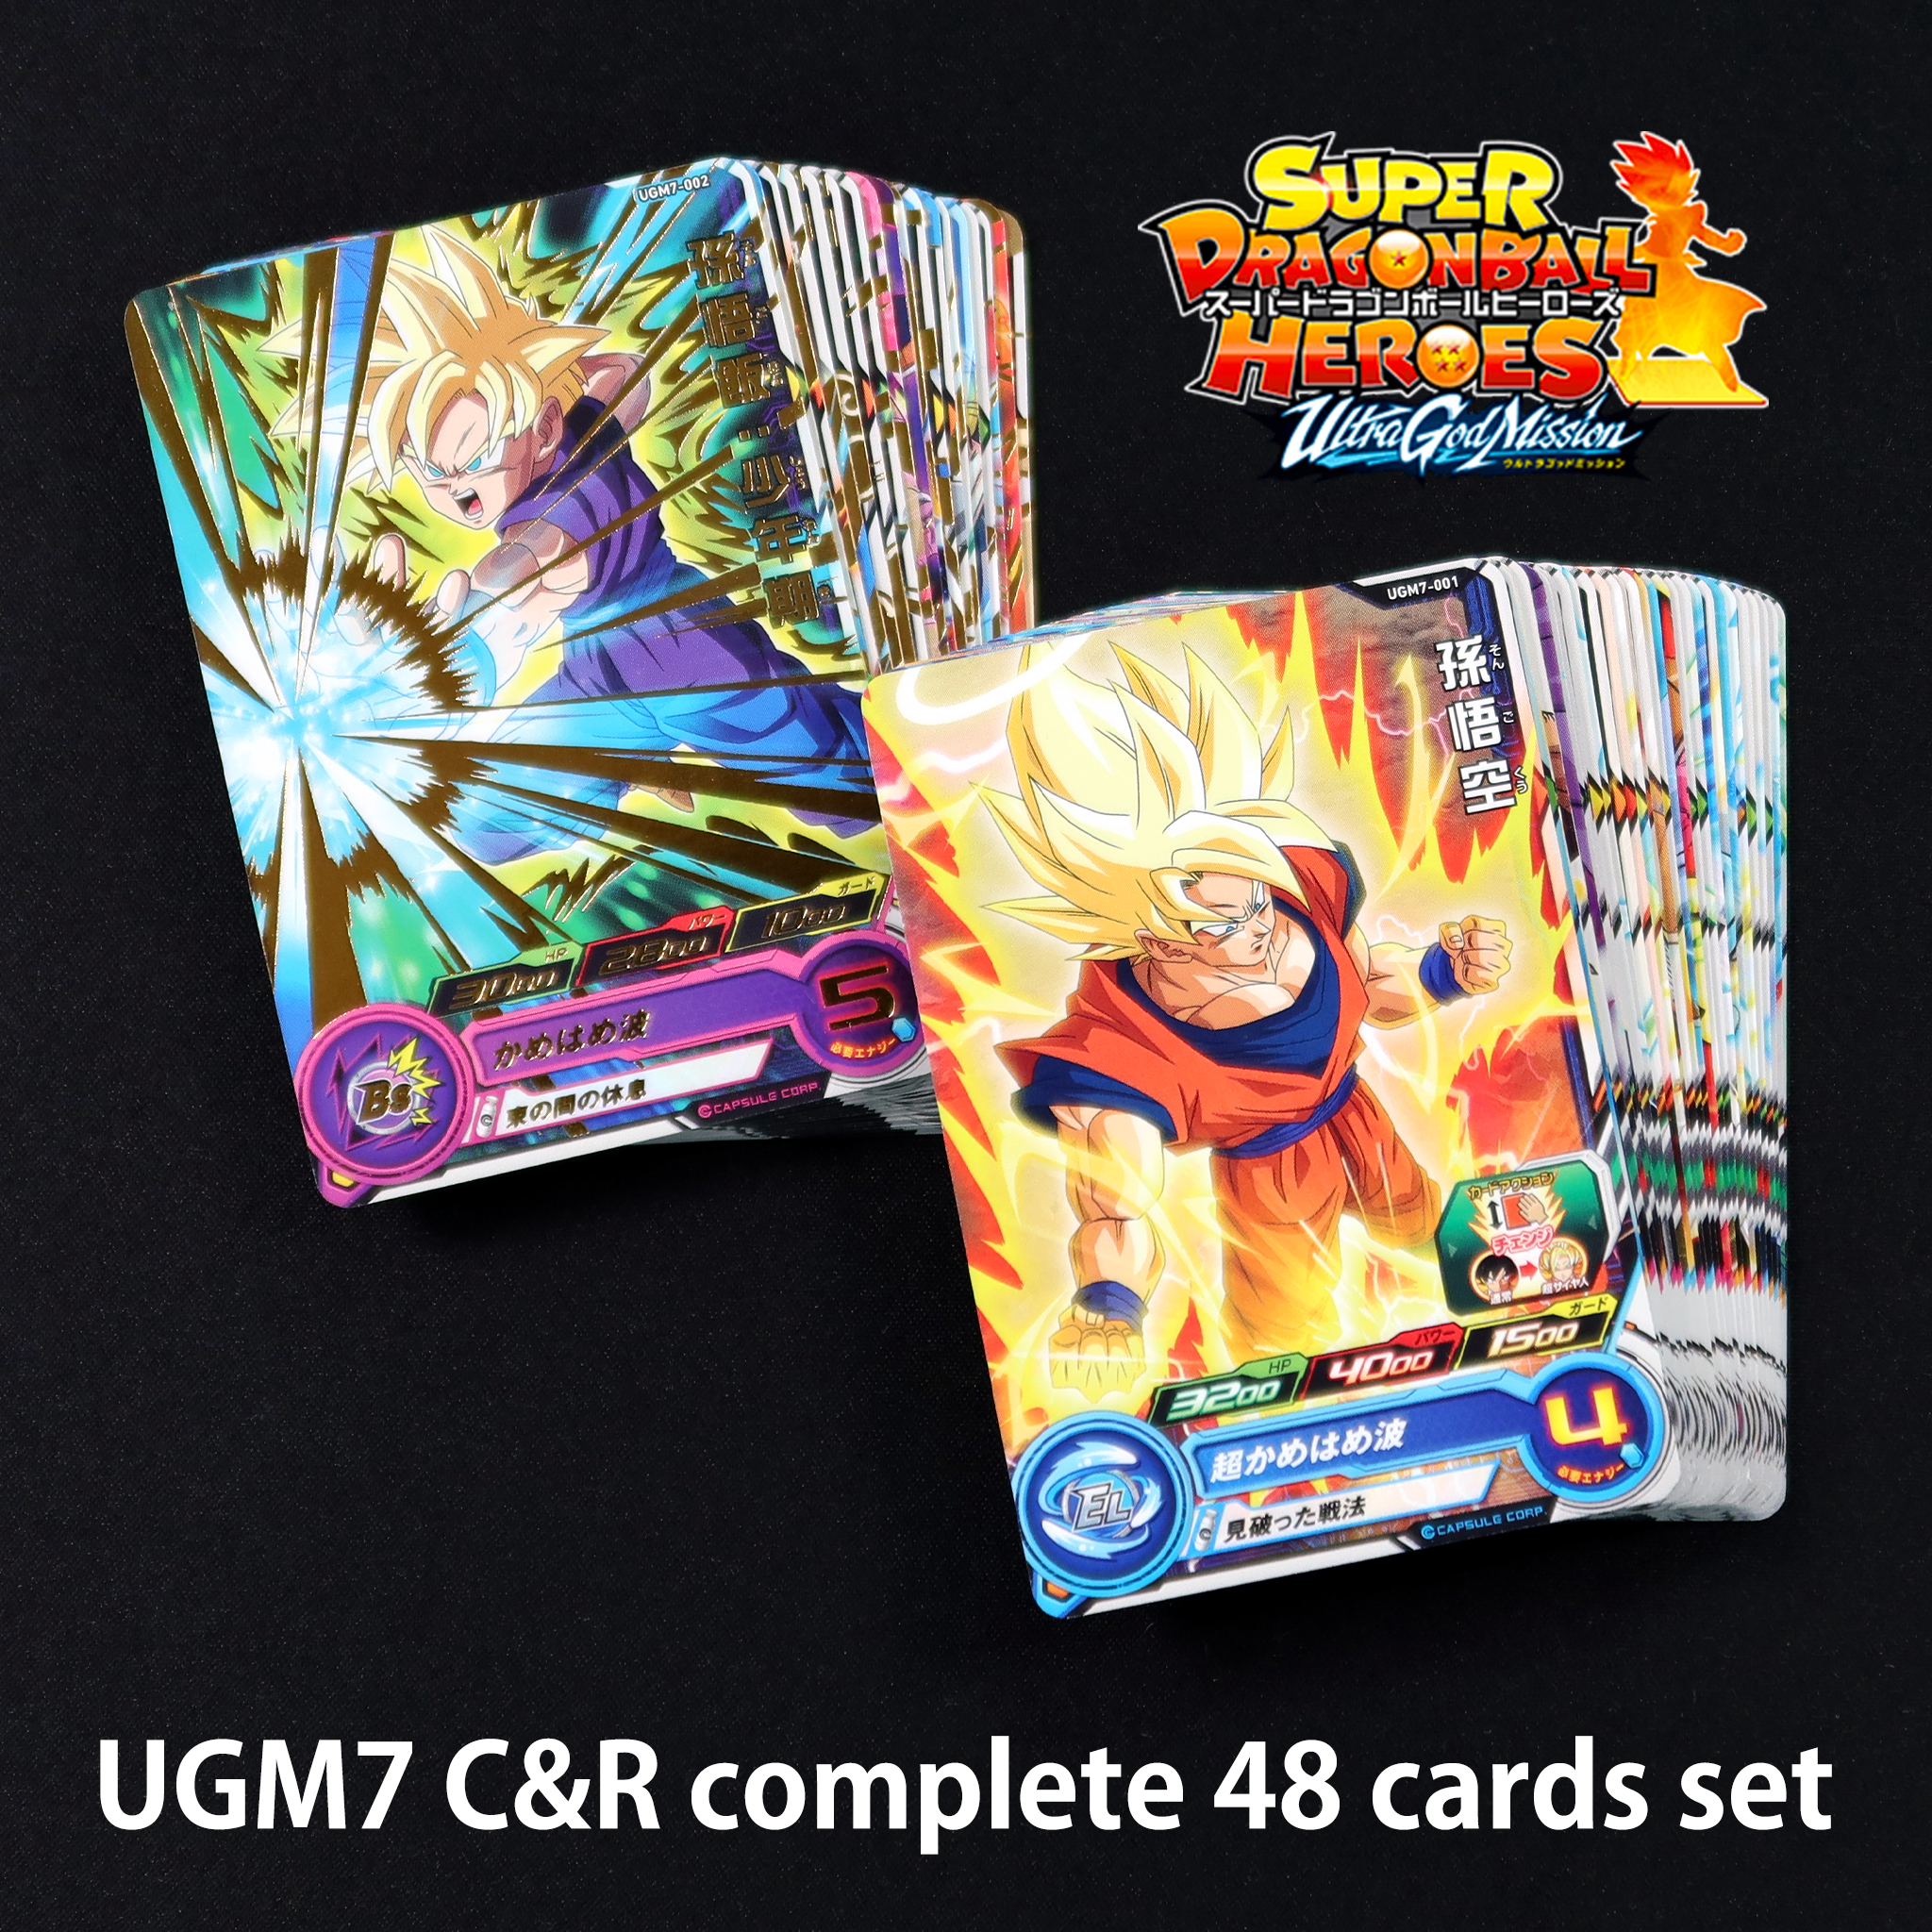 SUPER DRAGON BALL HEROES ULTRA GOD MISSION 7 C&R complete 48 cards set      30 Common cards     18 Rare cards